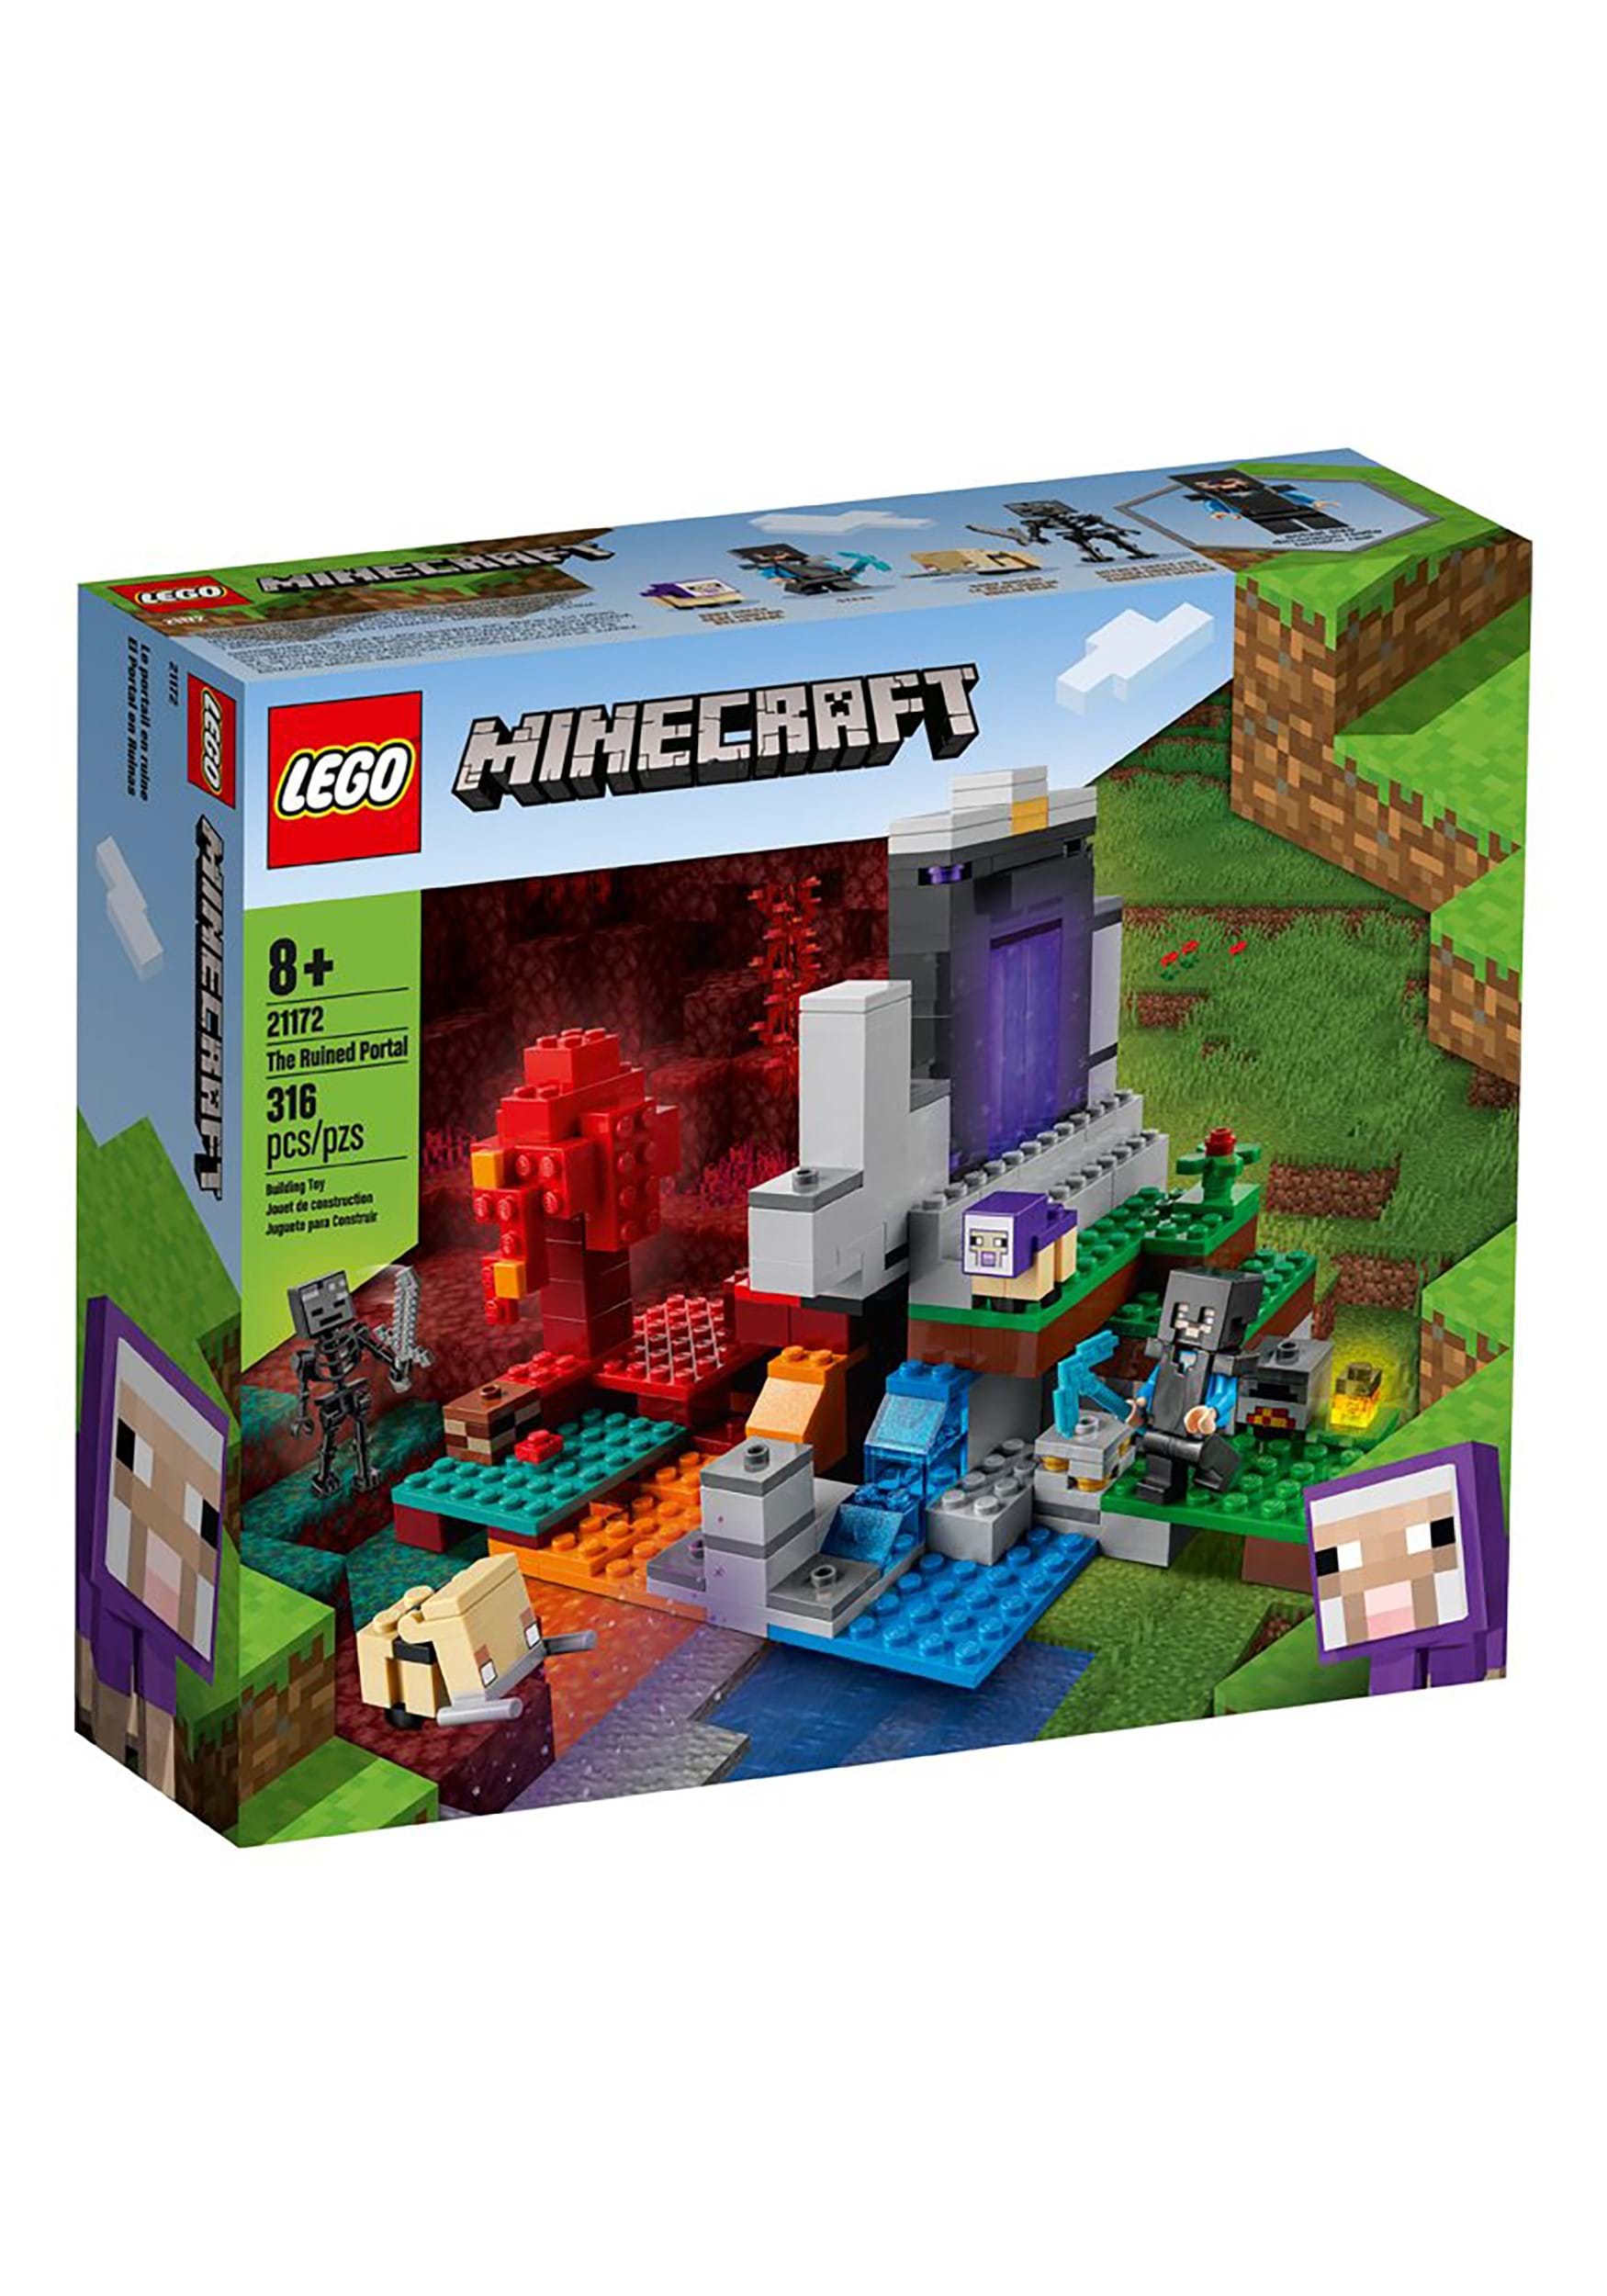 Hertog Blozend Donder Minecraft The Ruined Portal Building Set from LEGO